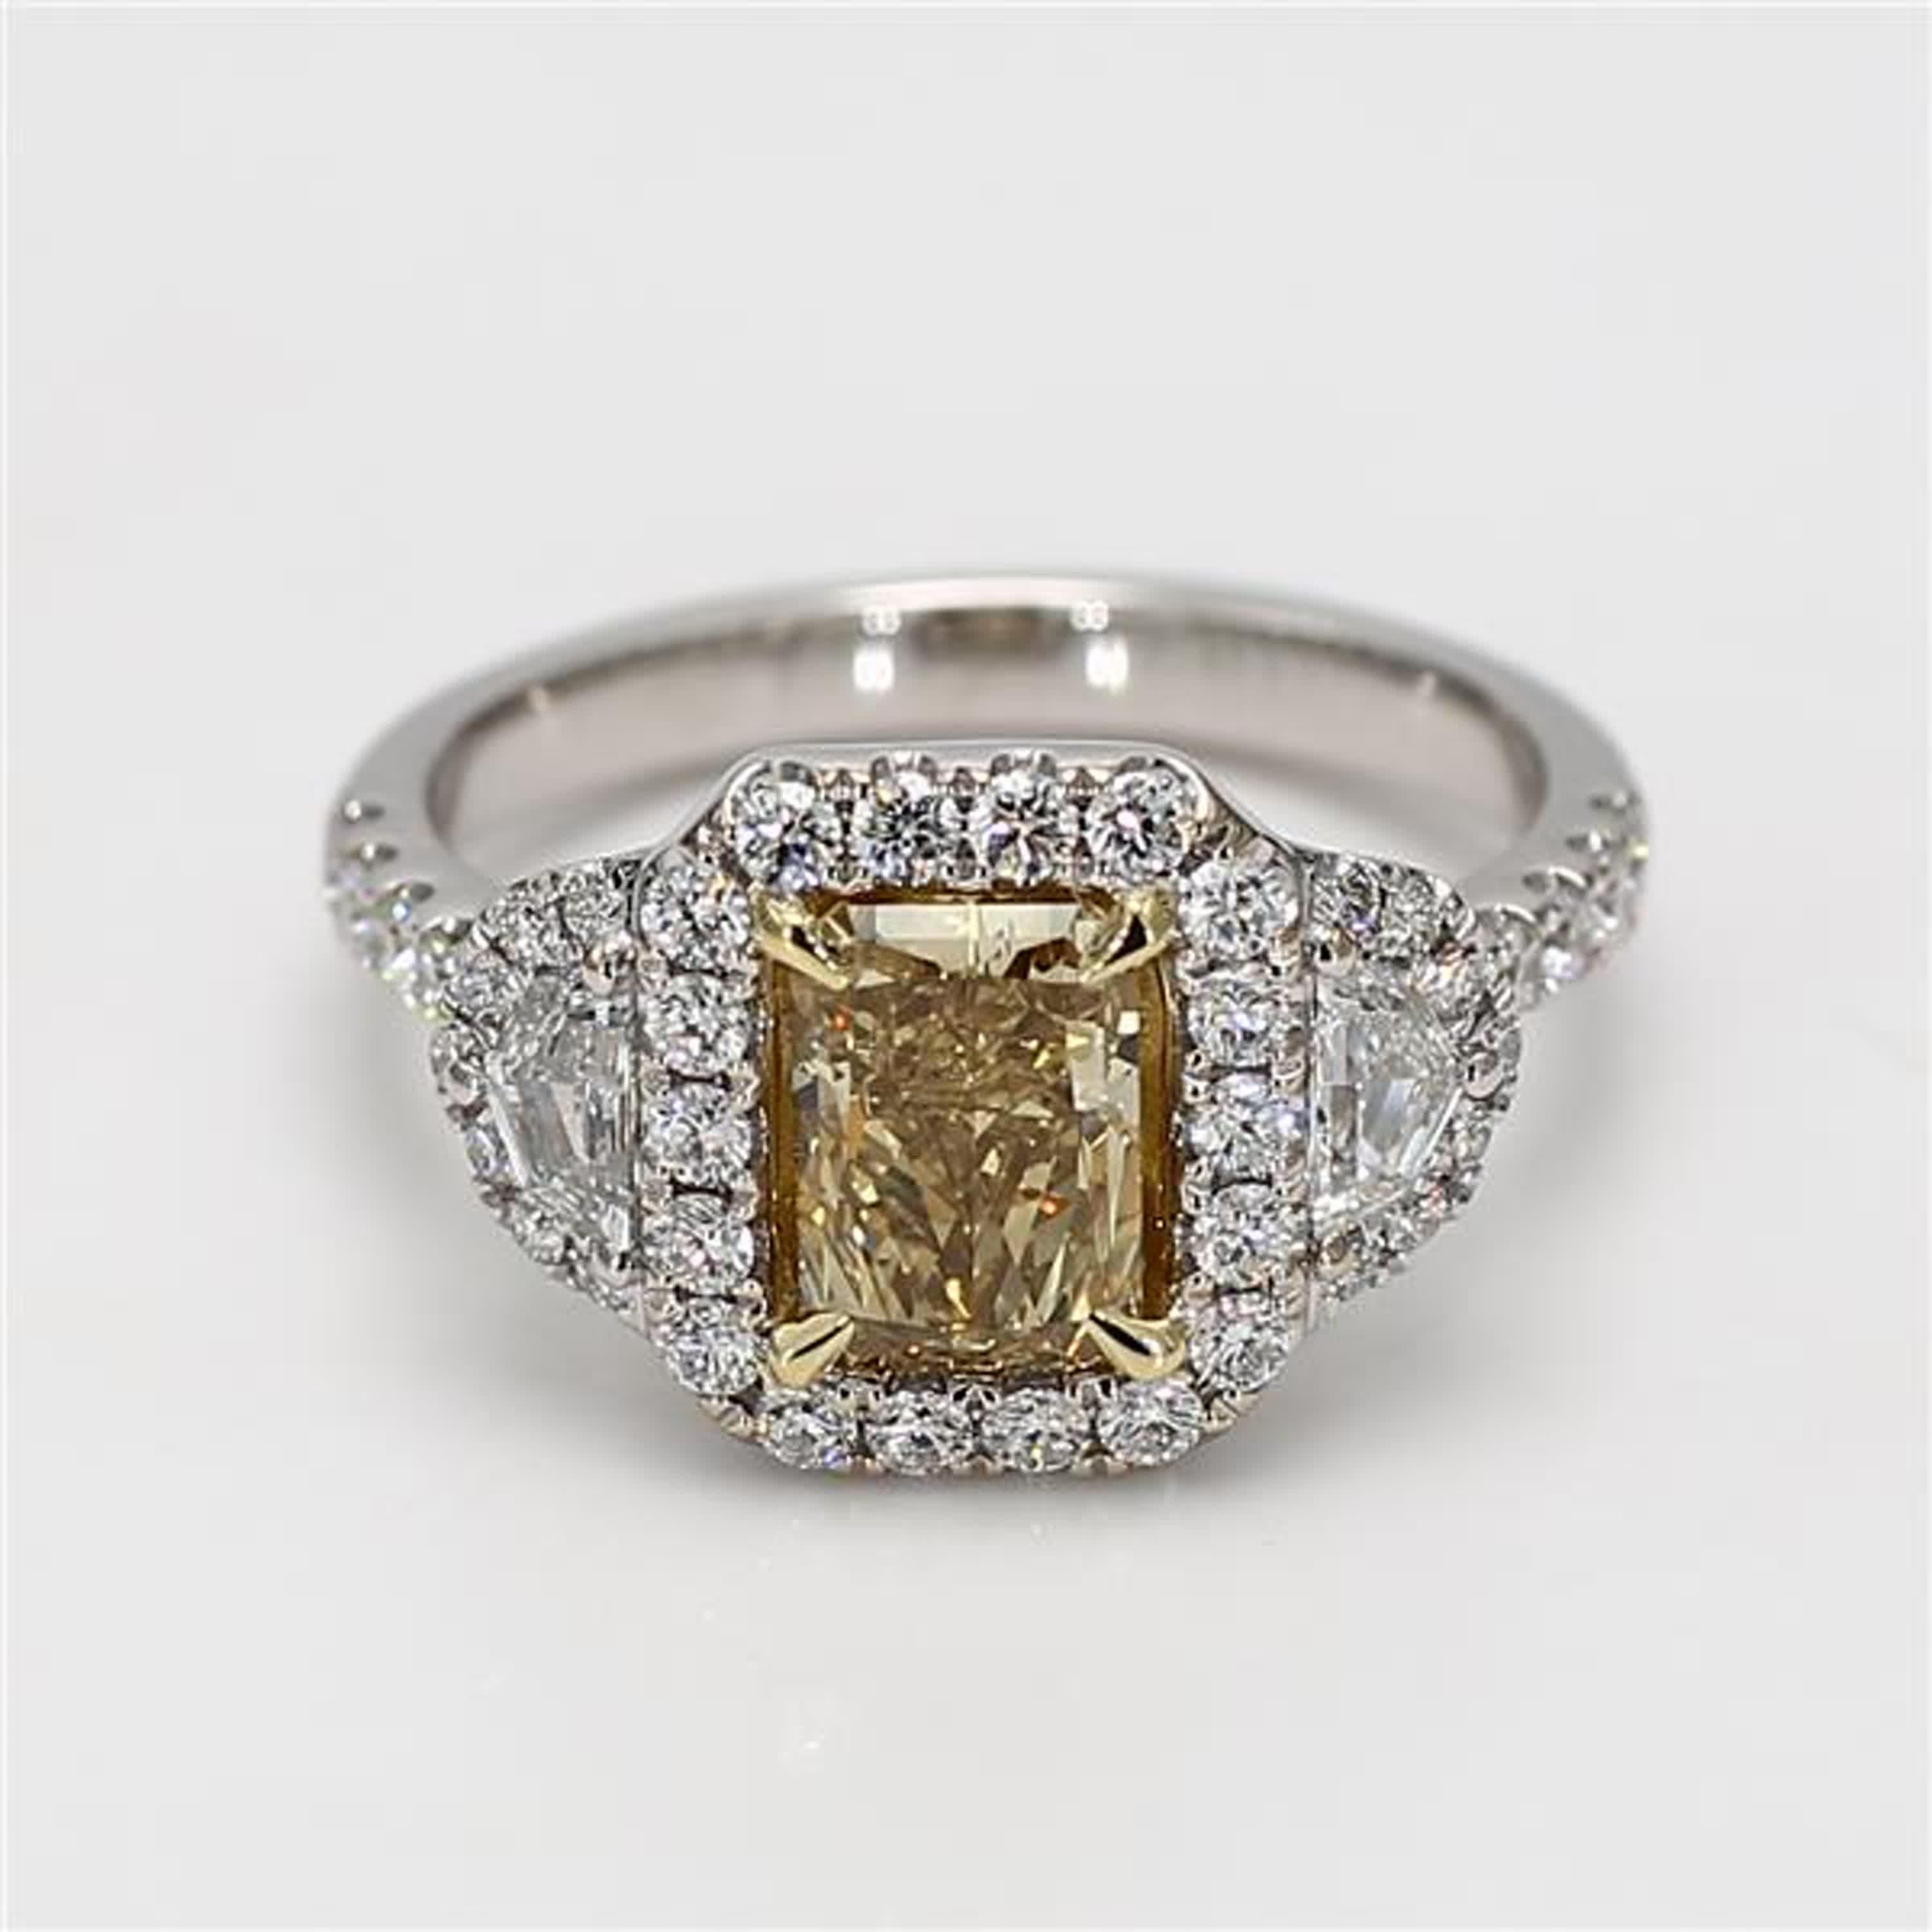 RareGemWorld's classic diamond ring. Mounted in a beautiful 18K Yellow and White Gold setting with a natural radiant cut brownish-yellow diamond. The yellow diamond is surrounded by natural trapezoid cut white diamond and round natural white diamond